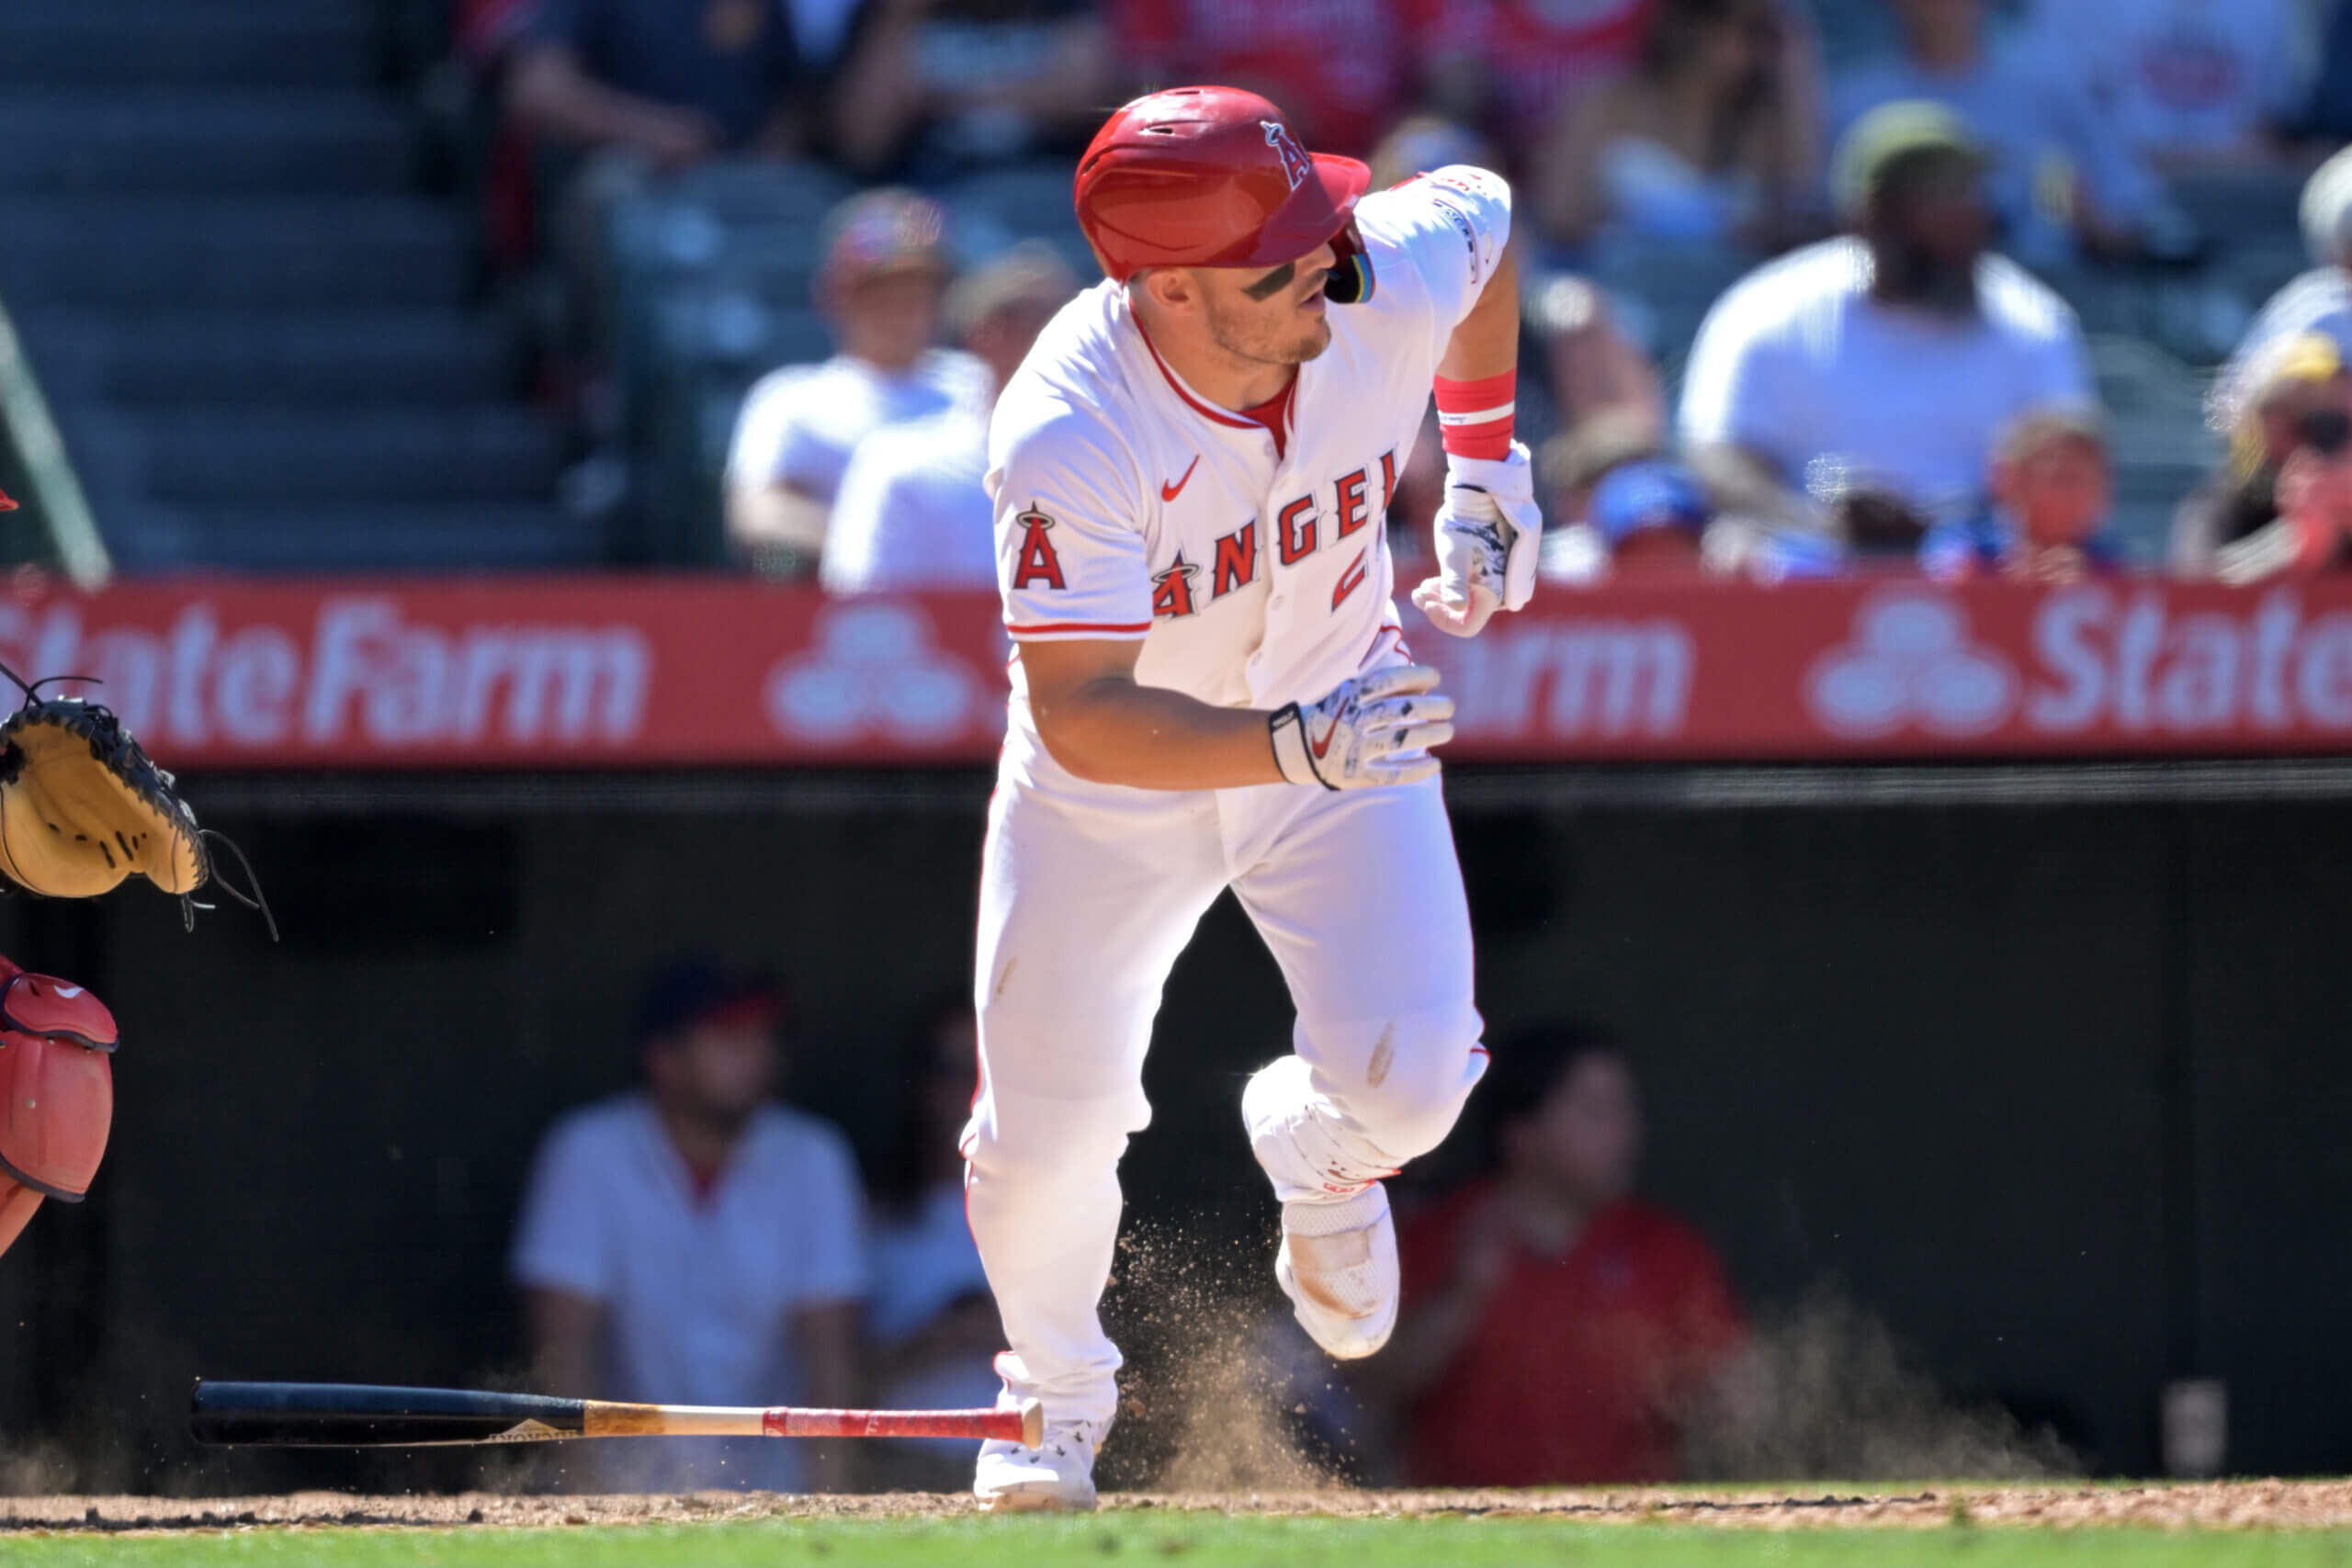 Angels’ Mike Trout undergoing knee surgery for torn meniscus, expected to return this season